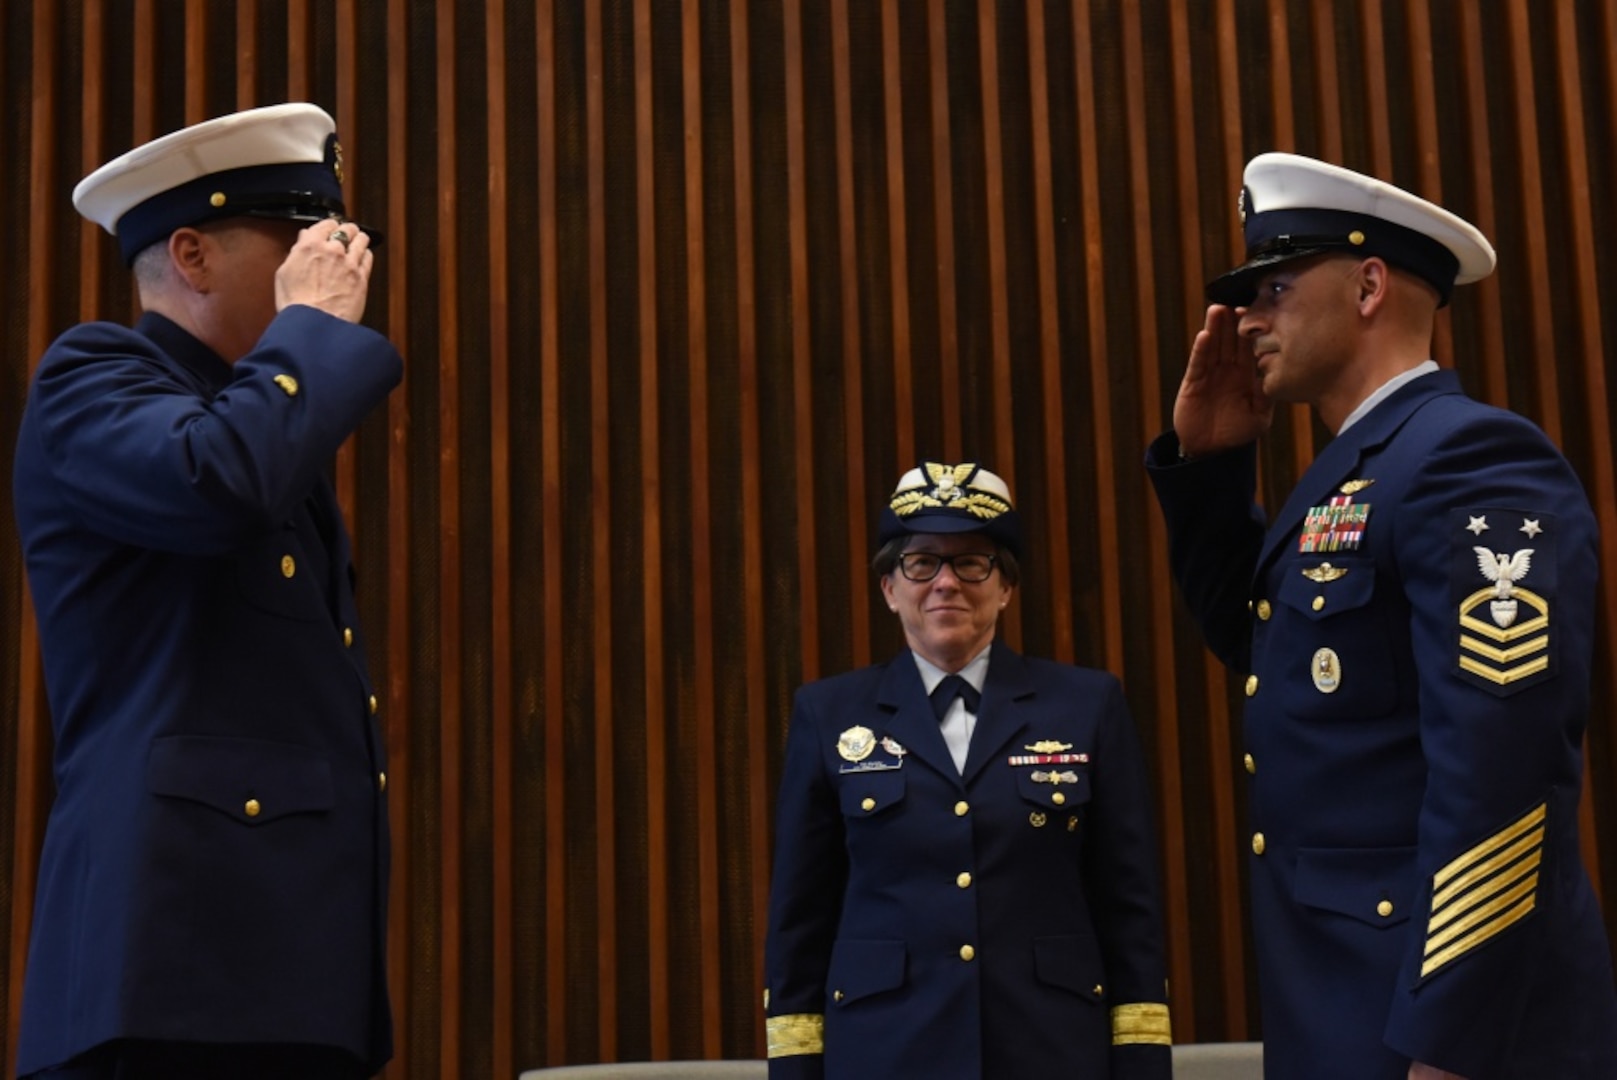 Command Master Chief Petty Officer James Bach passes the watch to Master Chief Petty Officer Jahmal Pereira during the Ninth Coast Guard District's change-of-watch ceremony in Cleveland, June 6, 2018. The ceremony was presided over by the Commander of the Coast Guard's Ninth District, Rear Adm. Joanna Nunan.